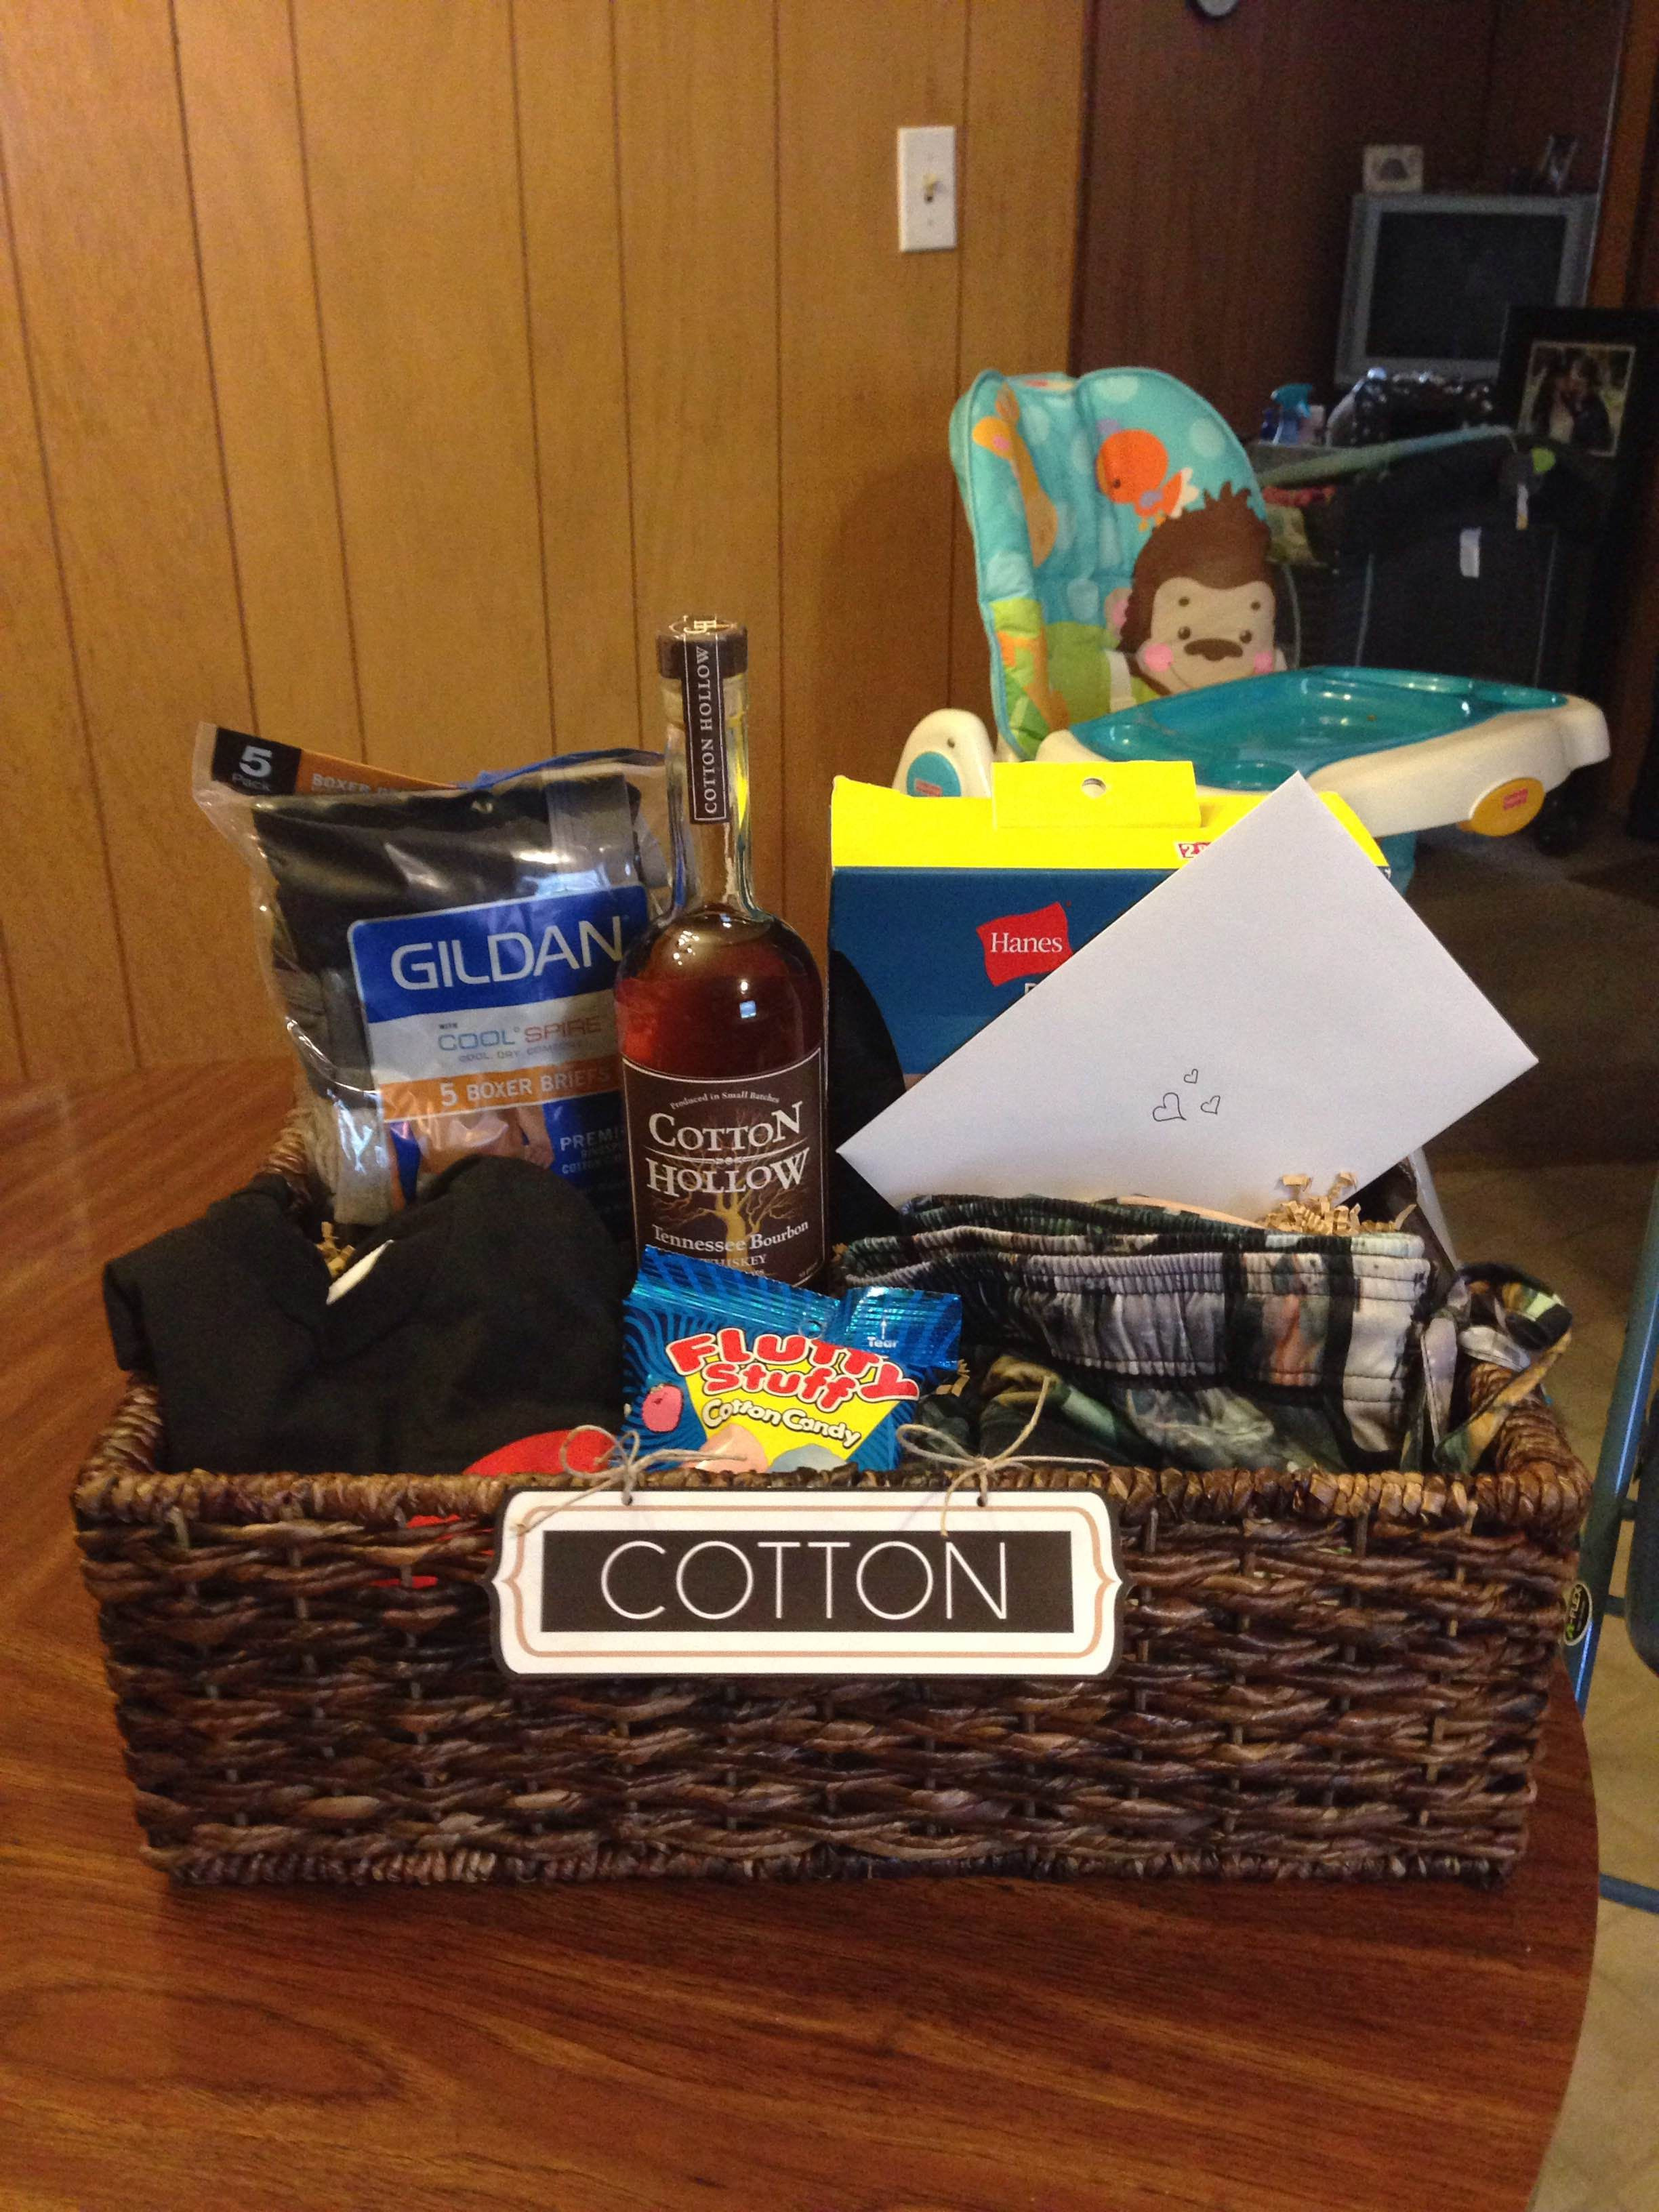 Wedding Gift Ideas For Second Marriages
 "Cotton" t basket I put to her for my husband for our